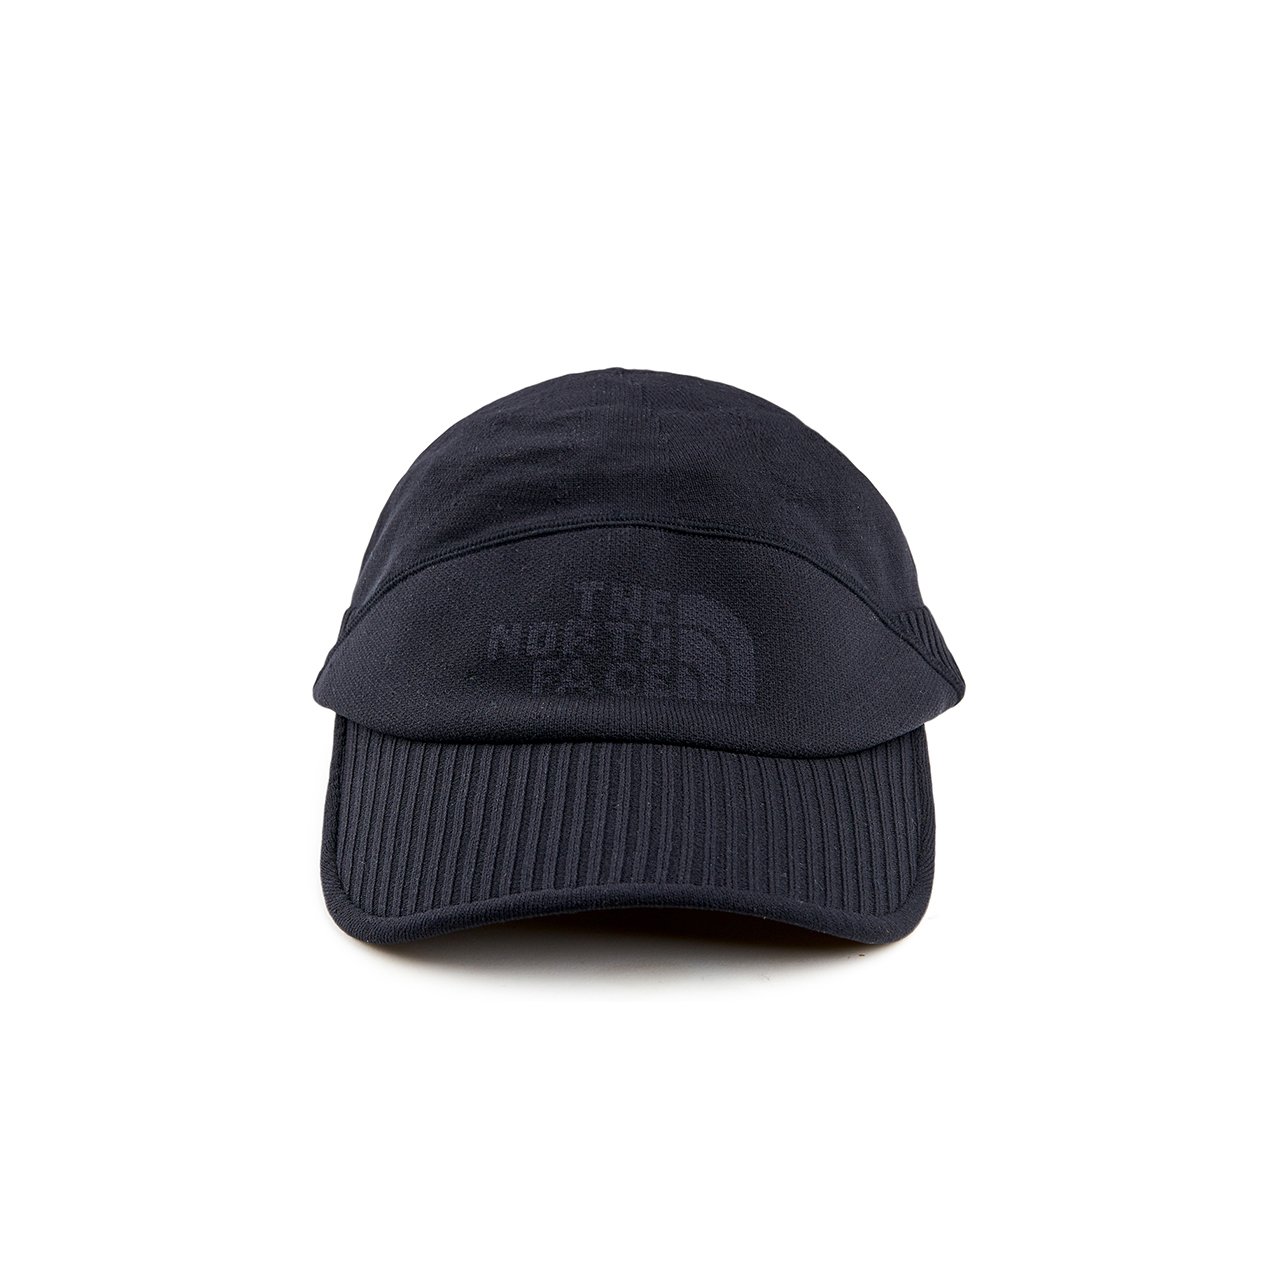 the north face black series knit cap (black) - nf0a3shijk3 - a.plus - Image - 1